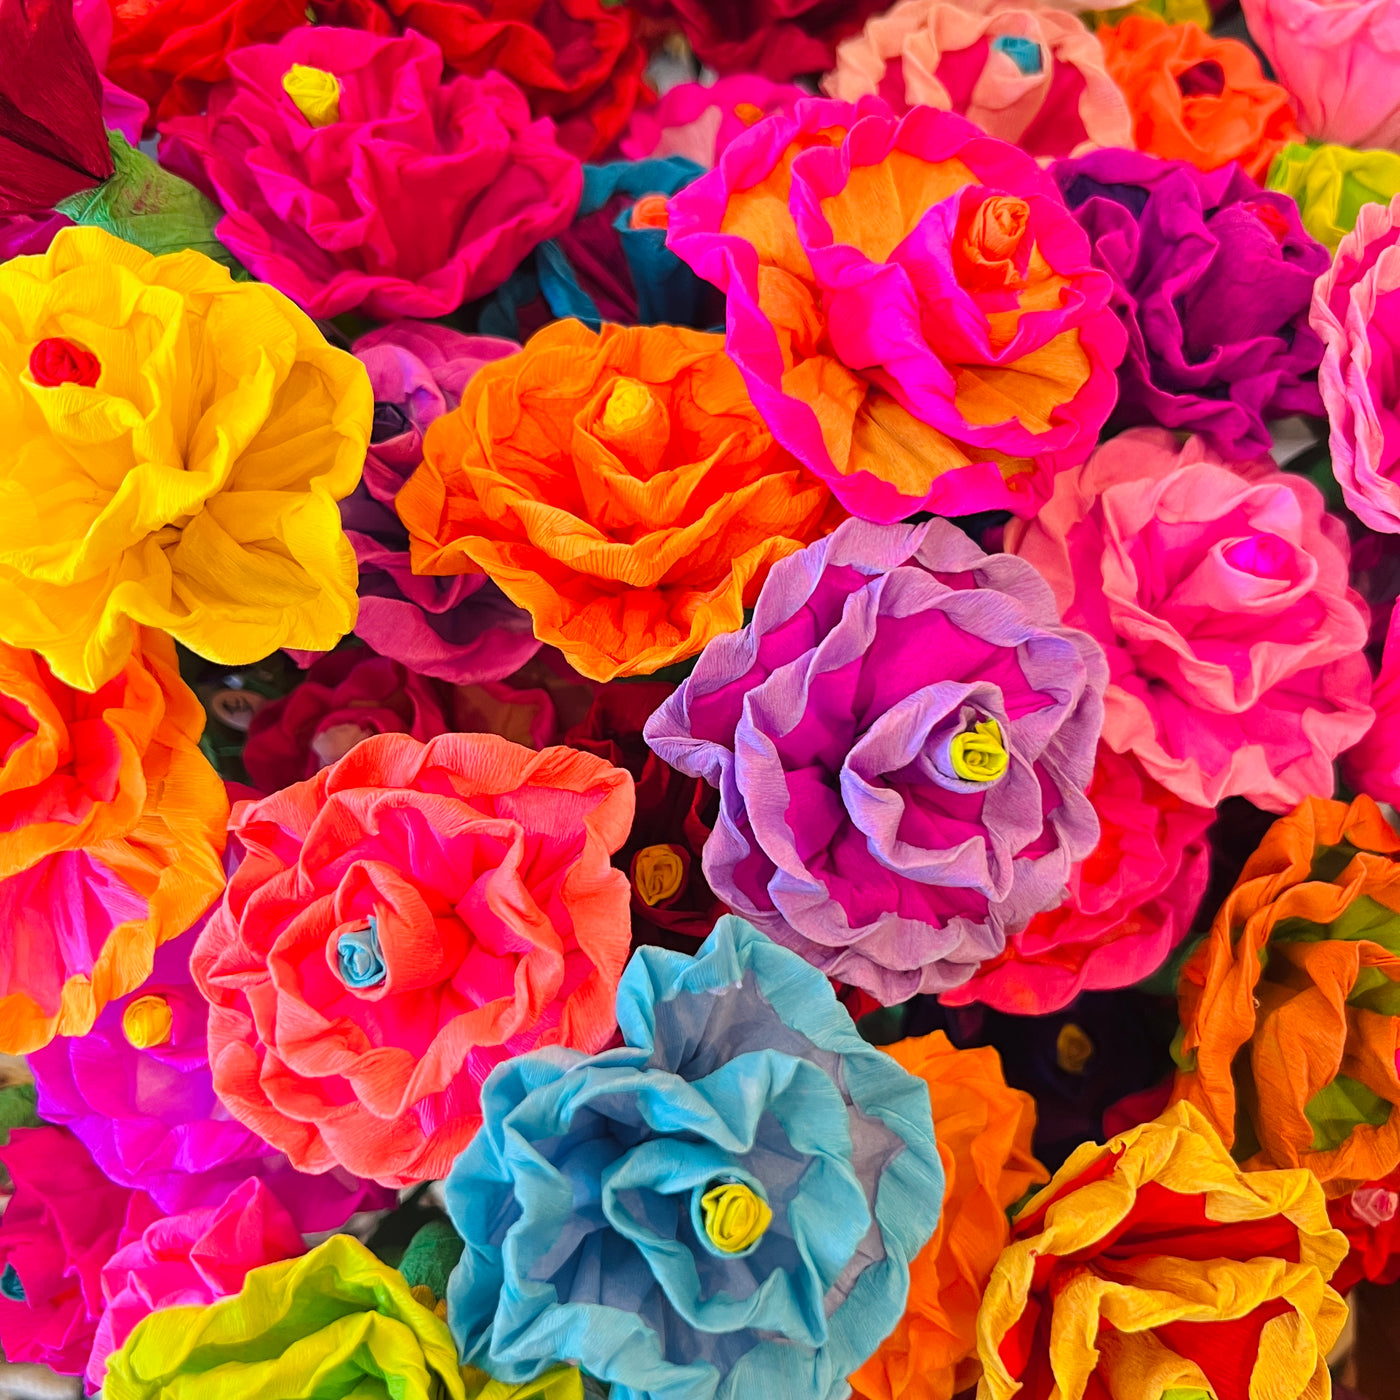 A close up view of a bundle of multi-colored paper flowers